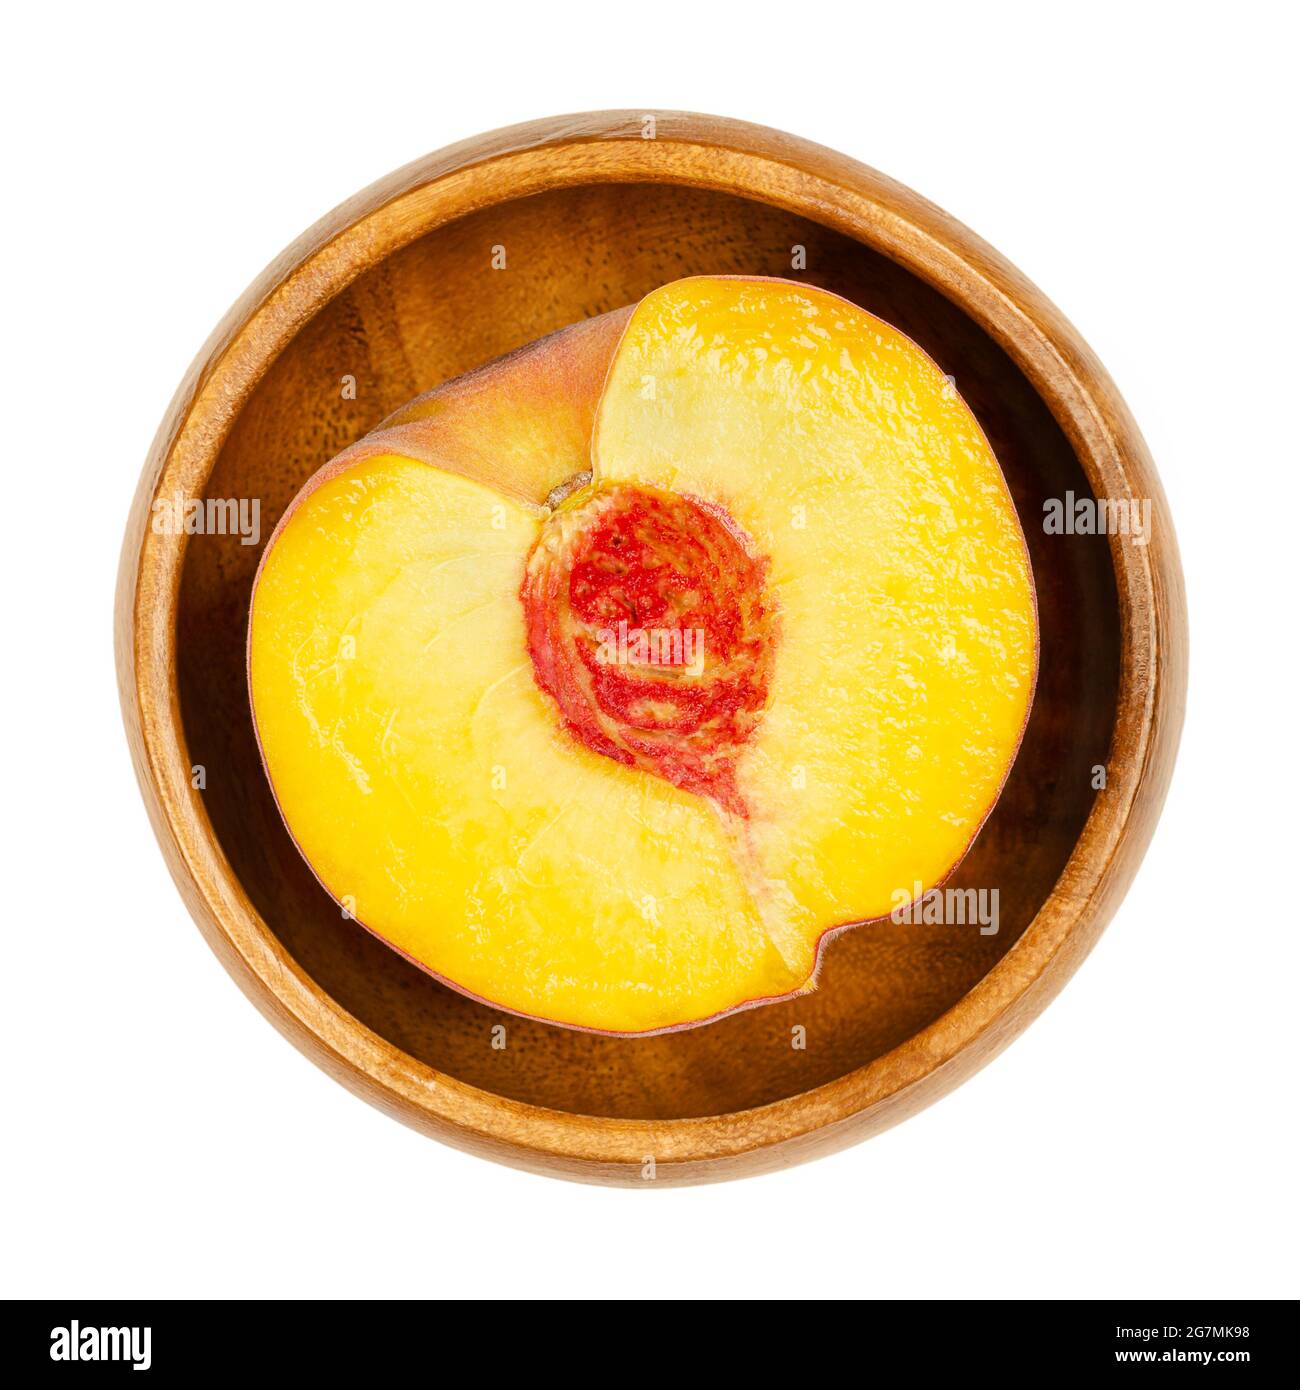 Peach half in a wooden bowl. Cross section of a ripe fruit, with yellow juicy fruit flesh, red clingstone in the center , and velvety skin. Stock Photo